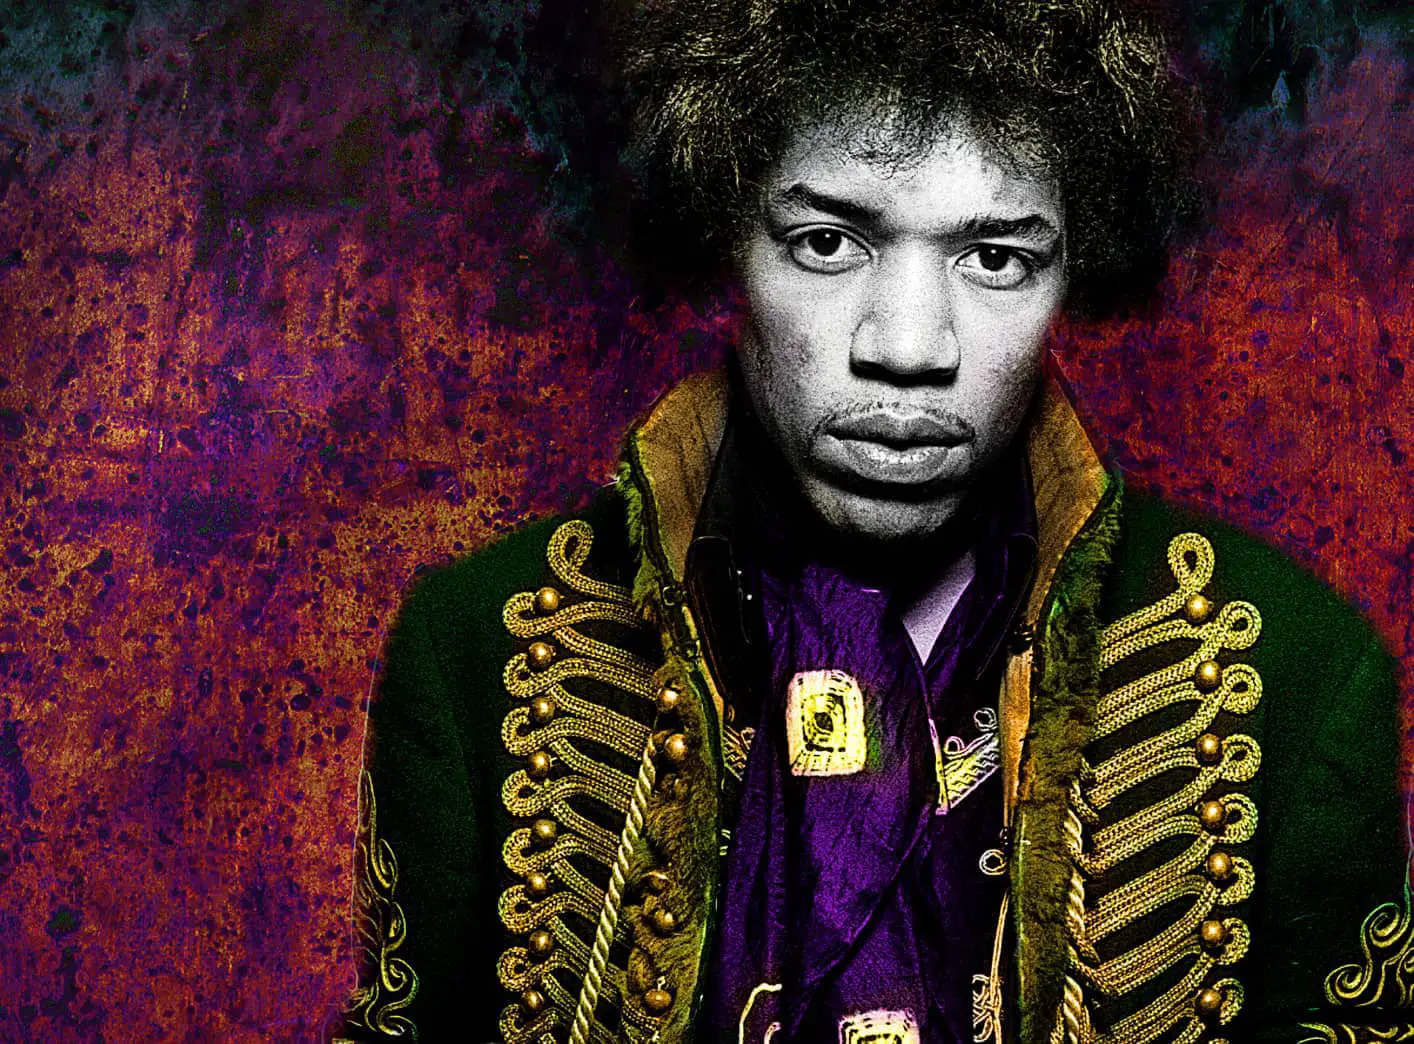 Image of Hendrix from Iconic Jimi exhibition poster